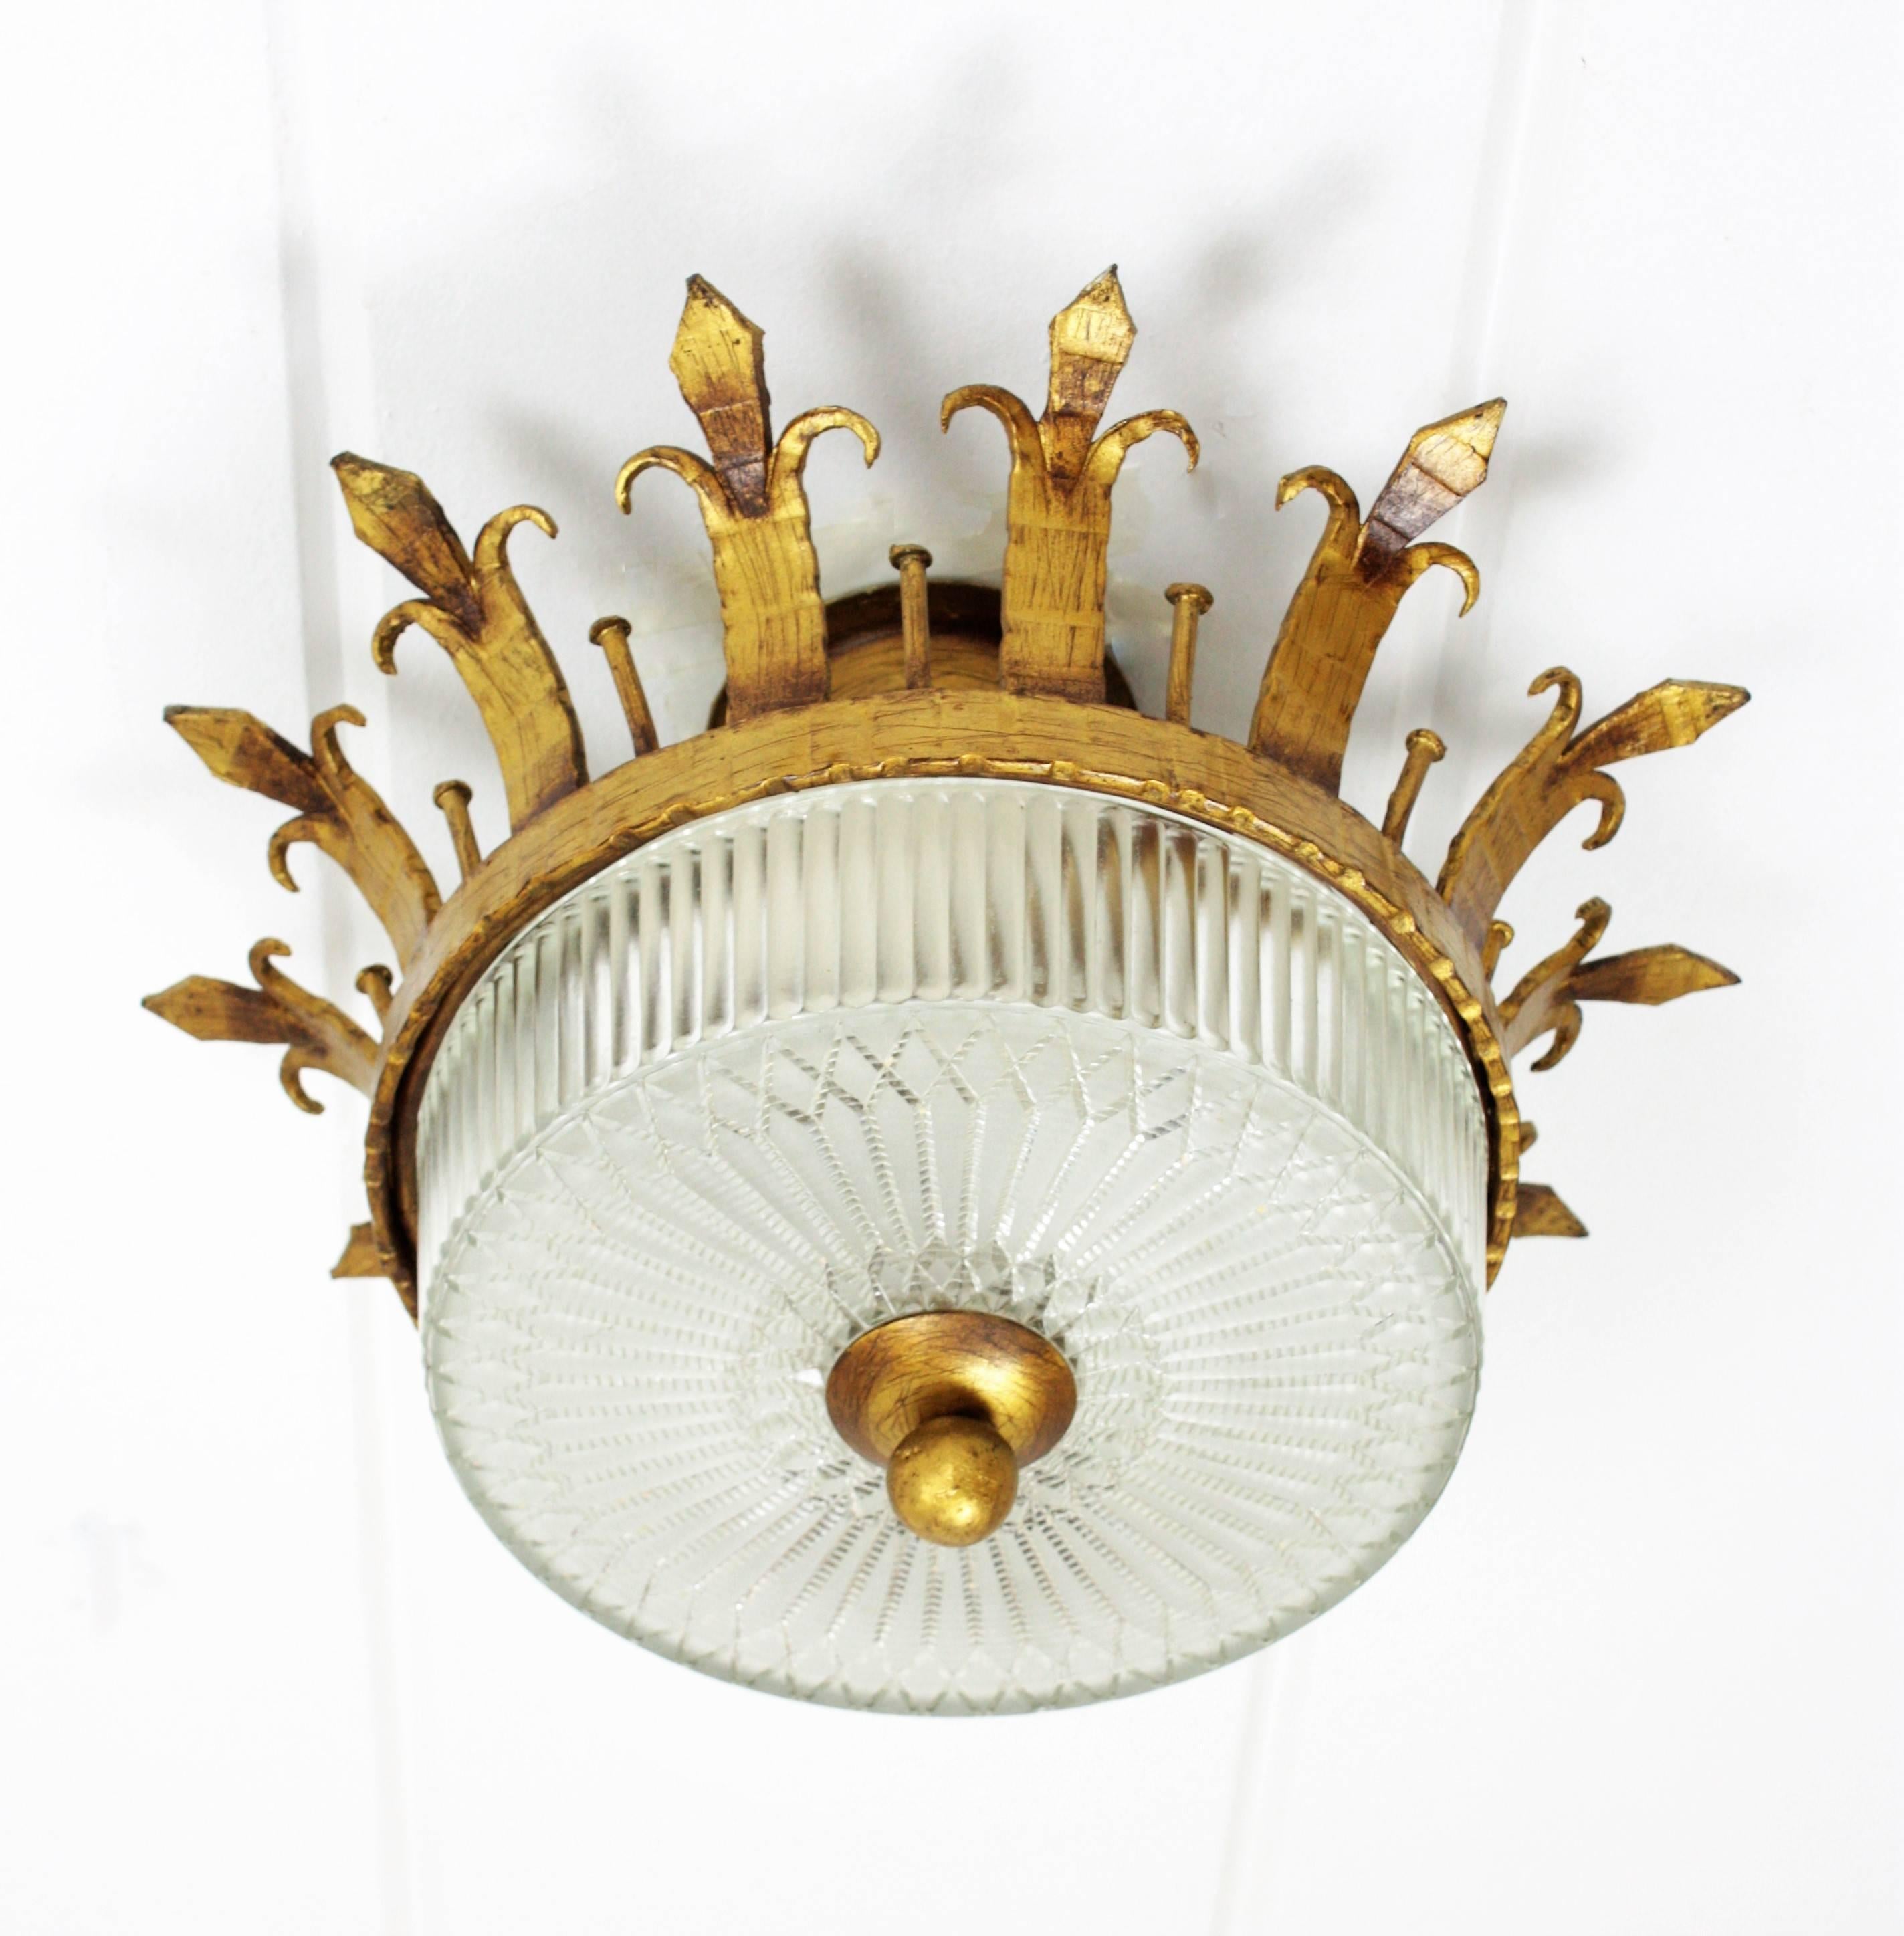 An sculptural hand hammered iron and glass ceiling light fixture with neoclassical and gothic revival accents. A forged and gilded iron fixture with canopy and a fluted frosted glass shade with a gilt iron ball finial. This lamp has an highly